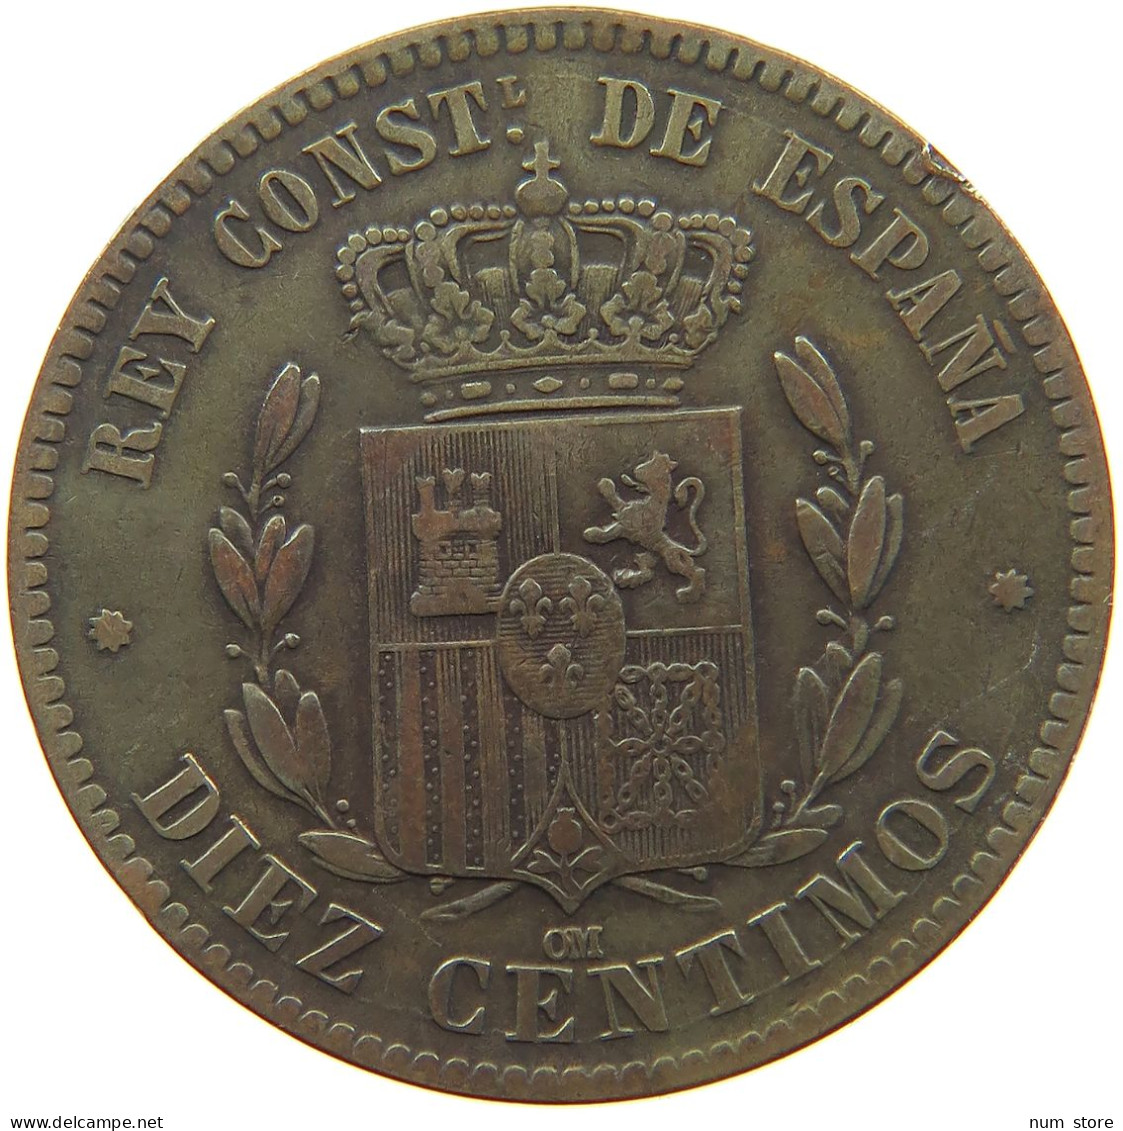 SPAIN 10 CENTIMOS 1878 ALFONSO XII. (1874 - 1885) #MA 065657 - First Minting